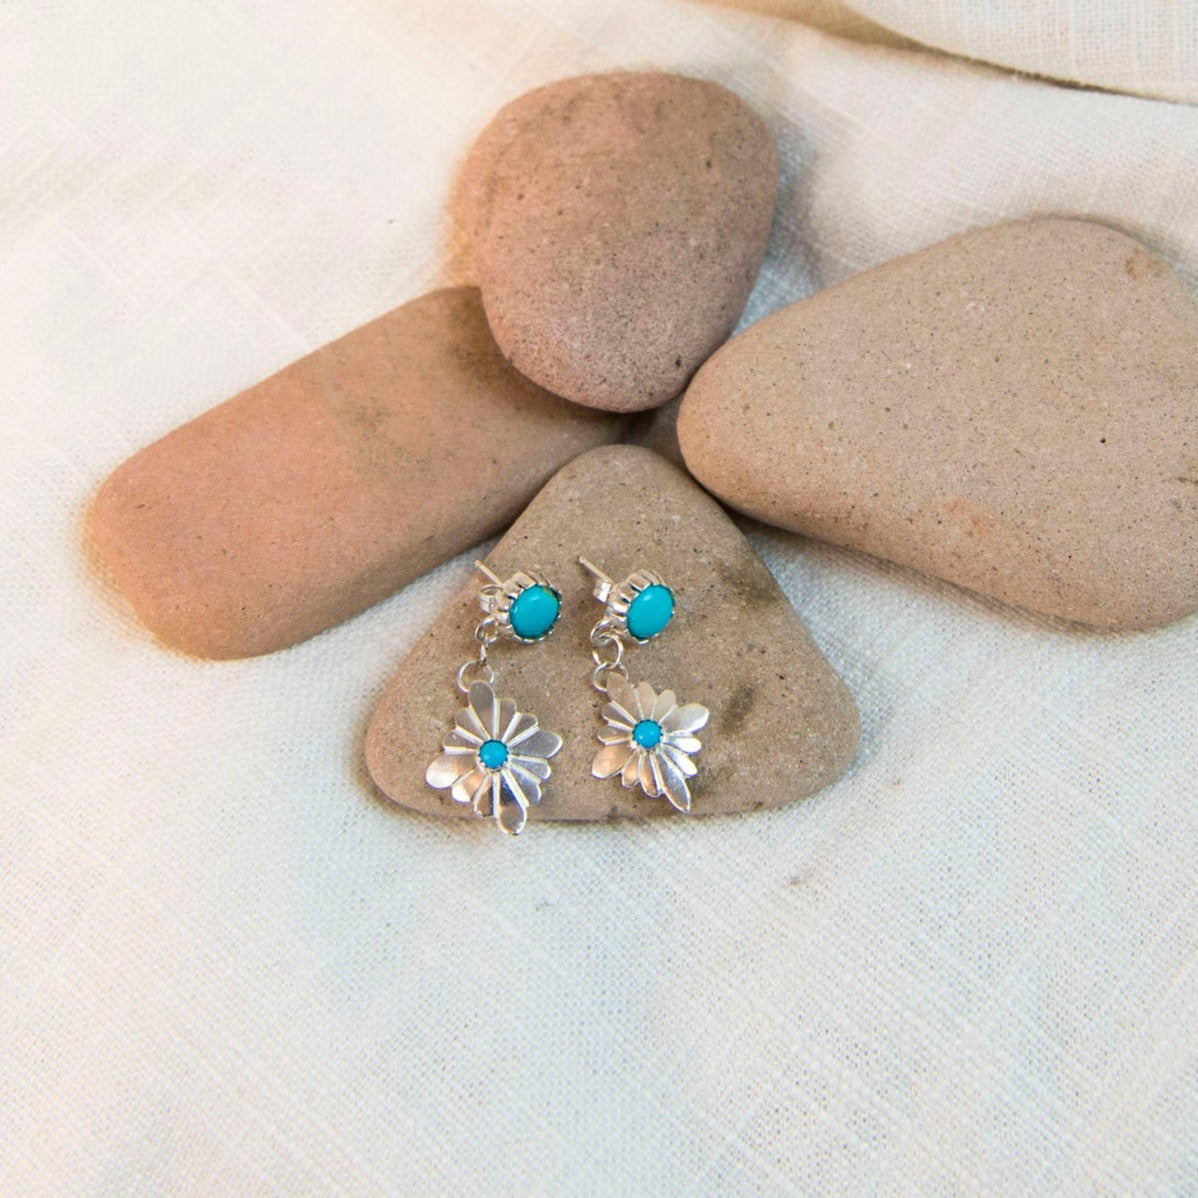 Handcrafted Earrings Made with Sterling Silver and Turquoise